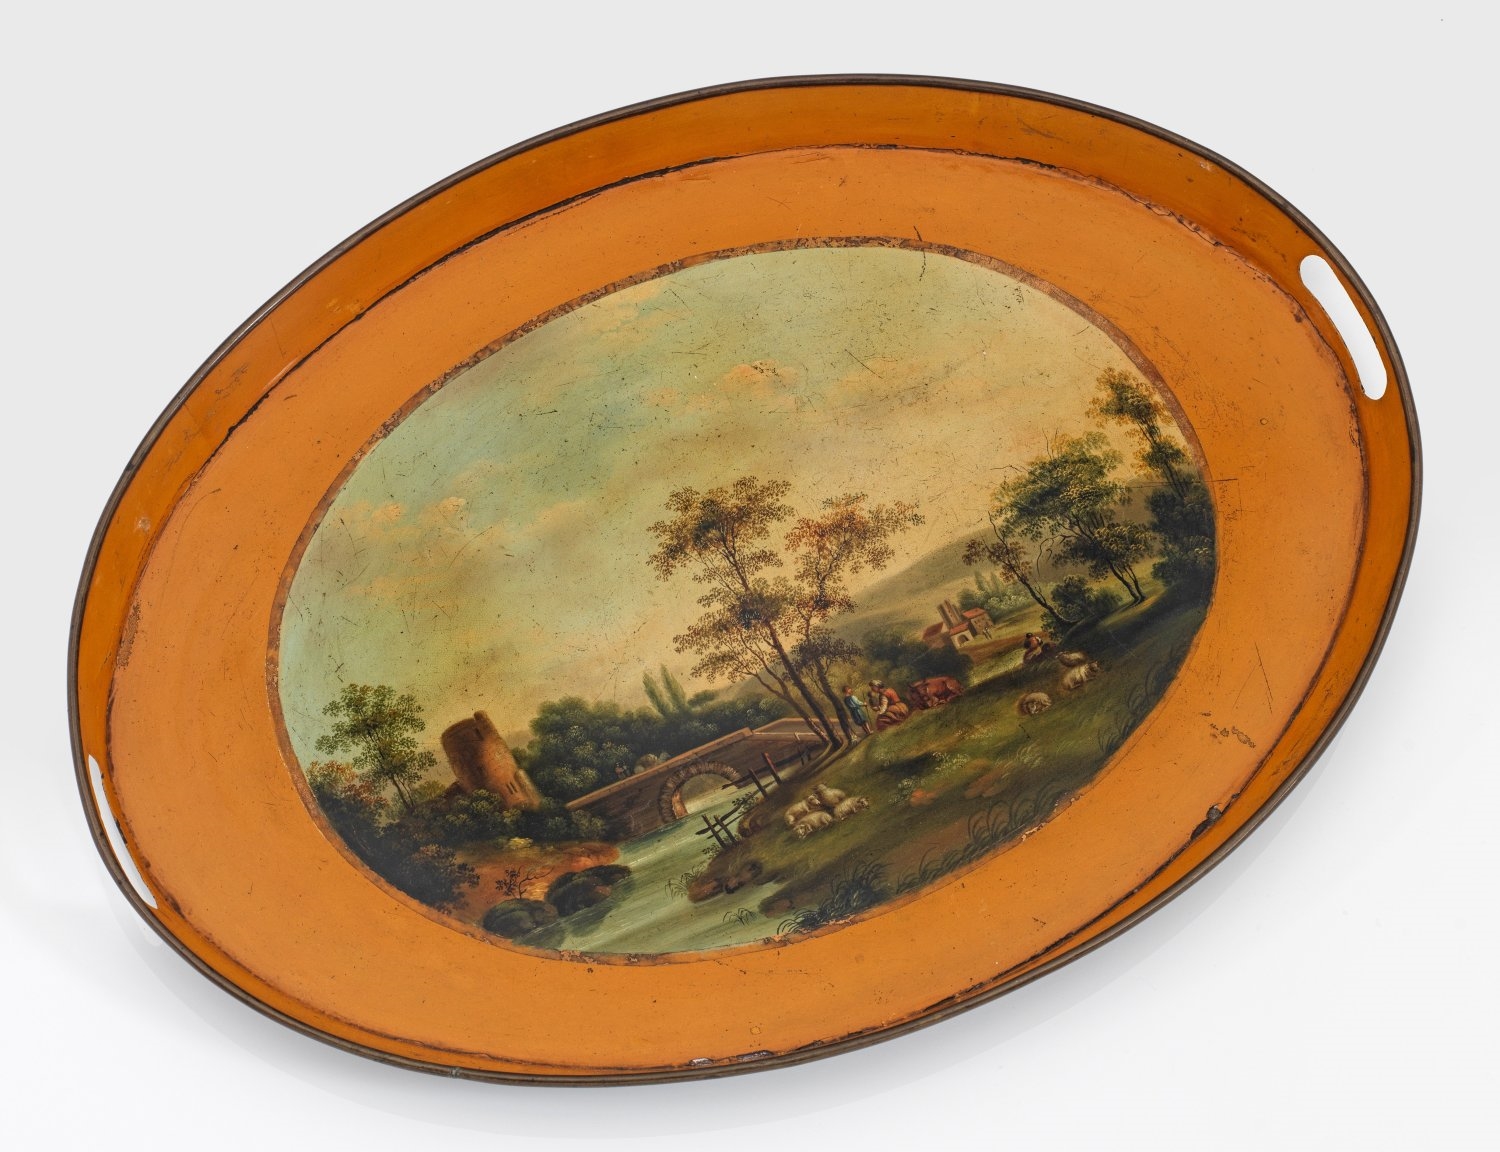 A large probably Brunswick lacquer tin tray with shepherds by a river - German School, 19th Century